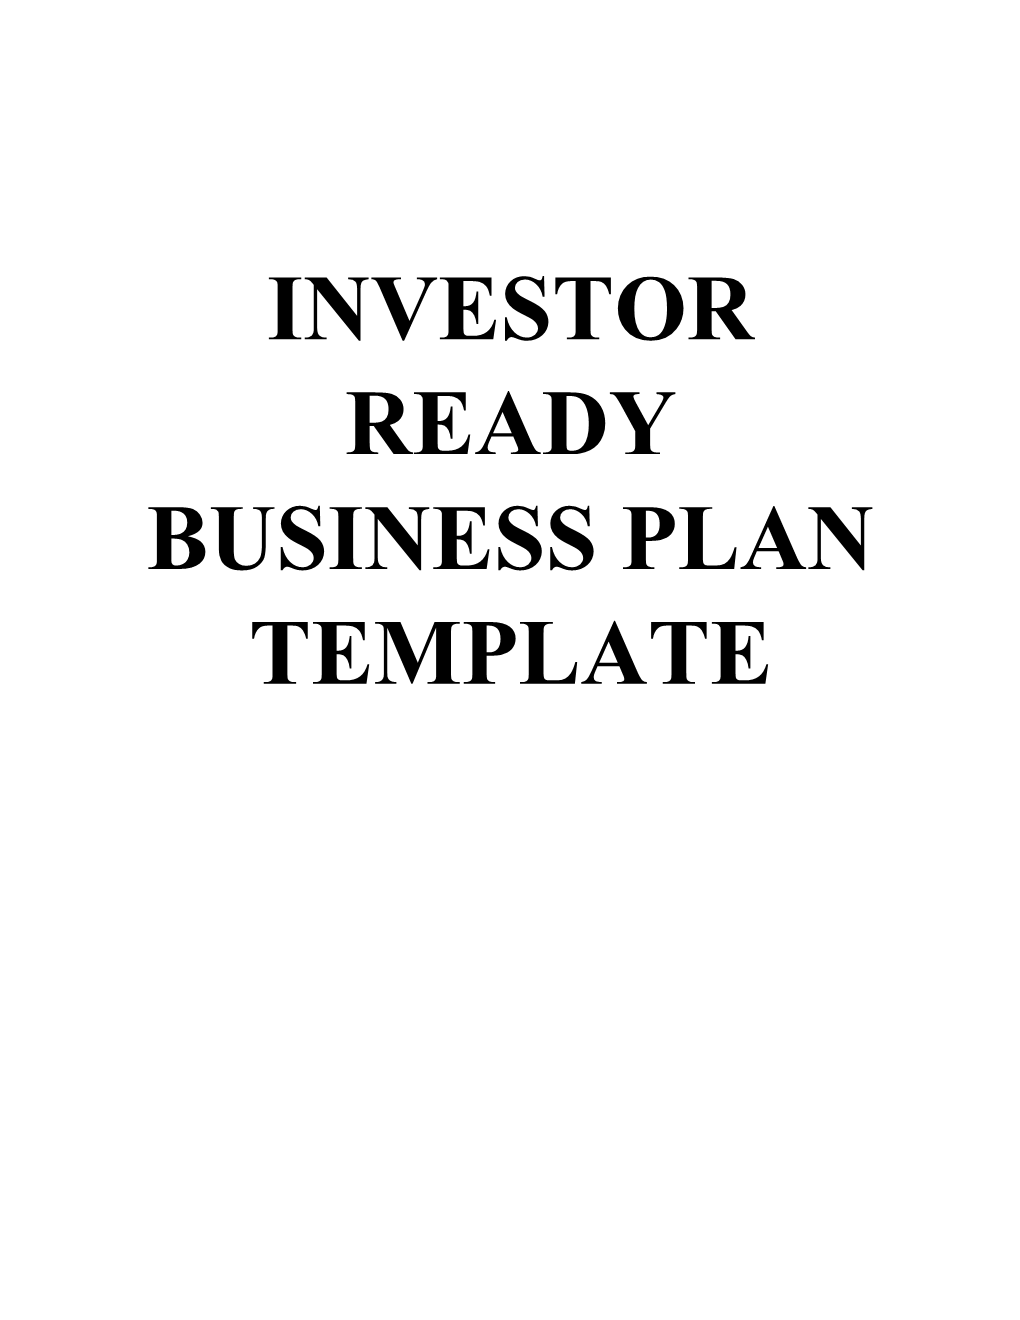 Investor Ready Business Plan Template